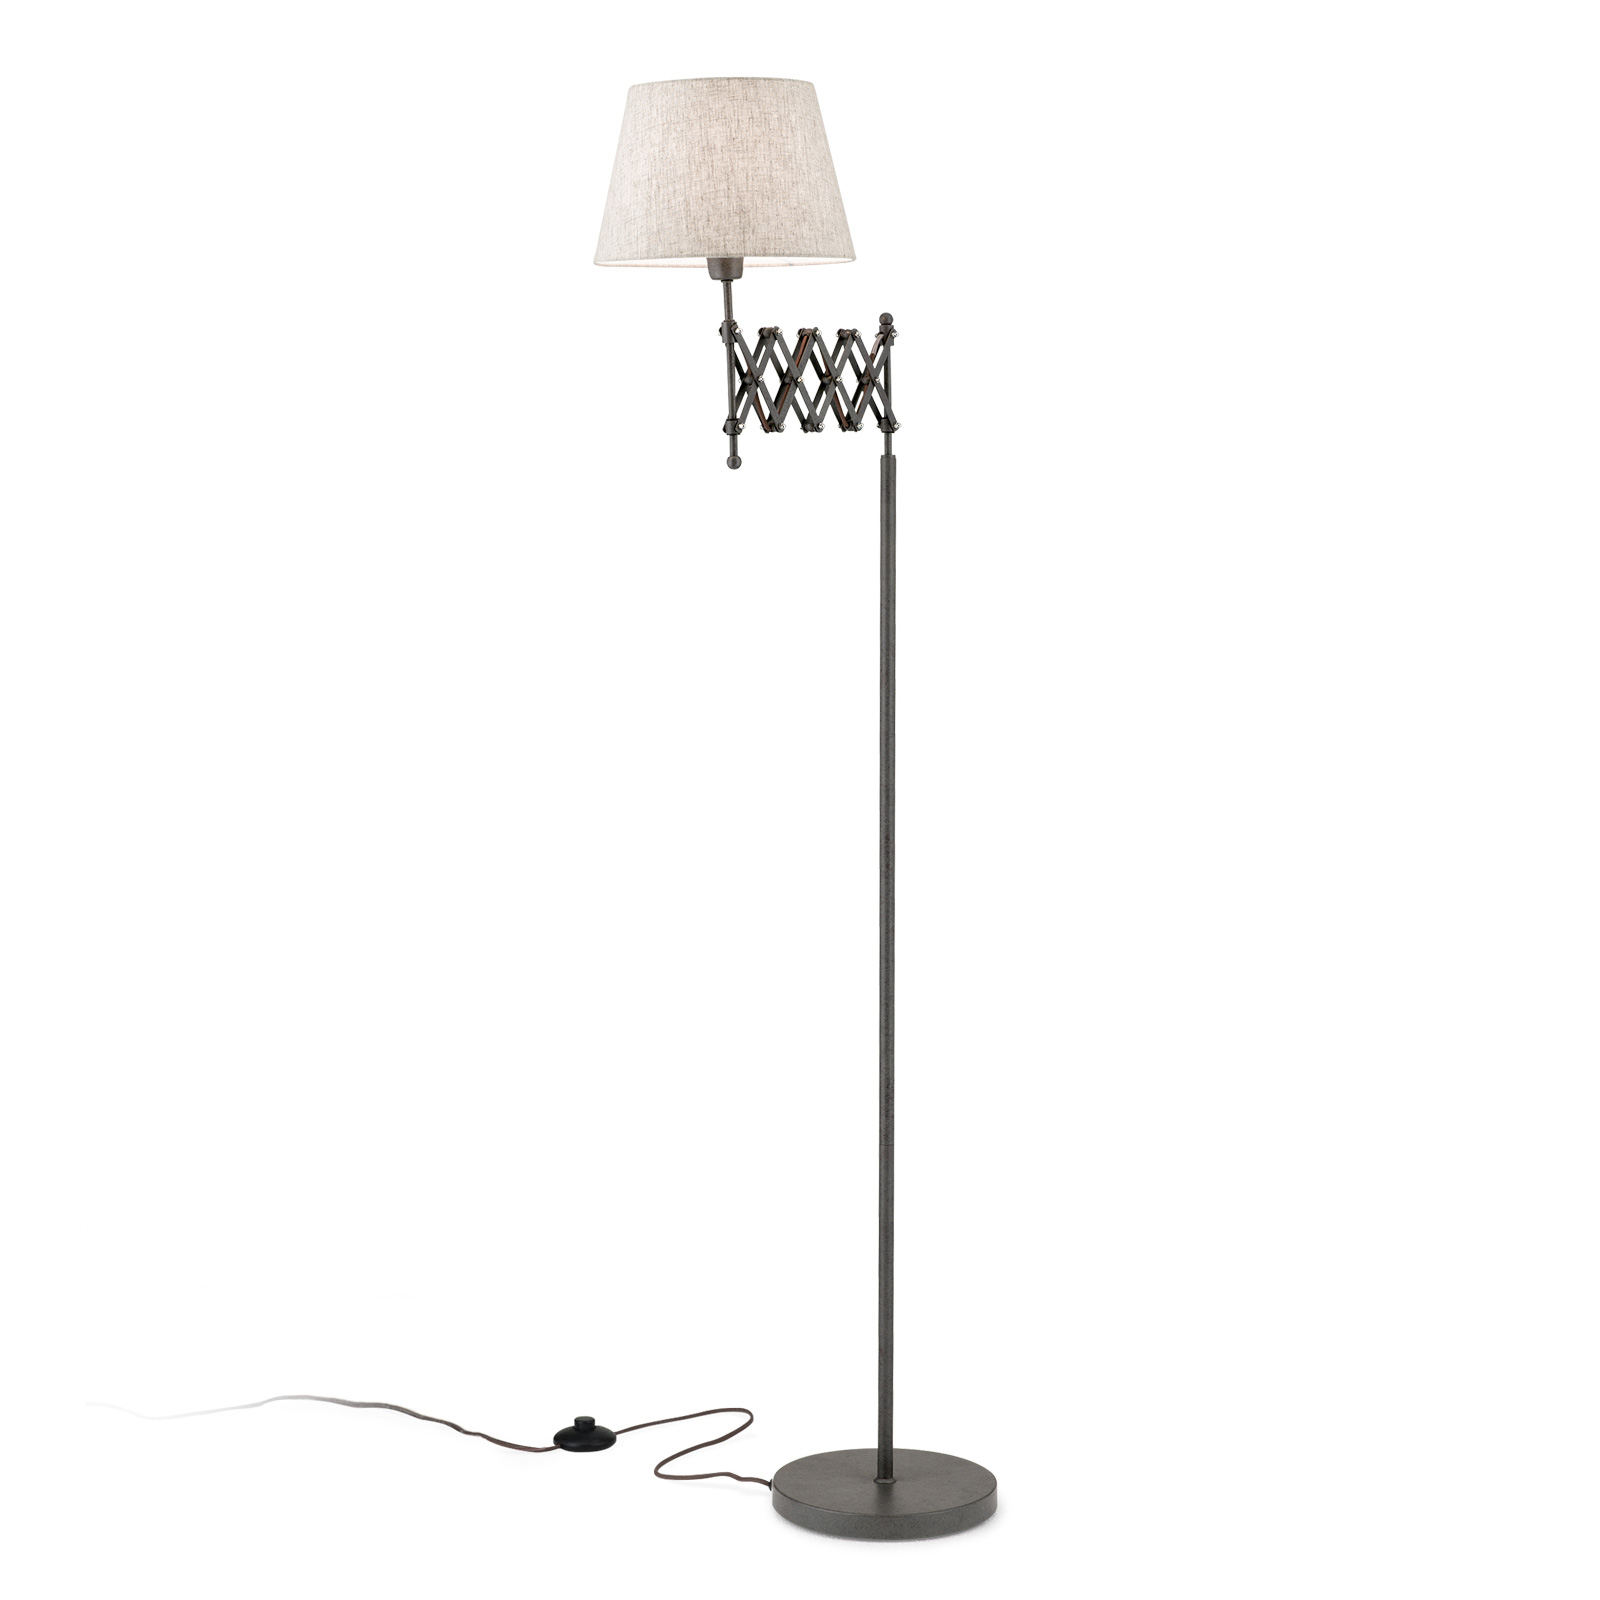 Factory floor lamp with linen lampshade